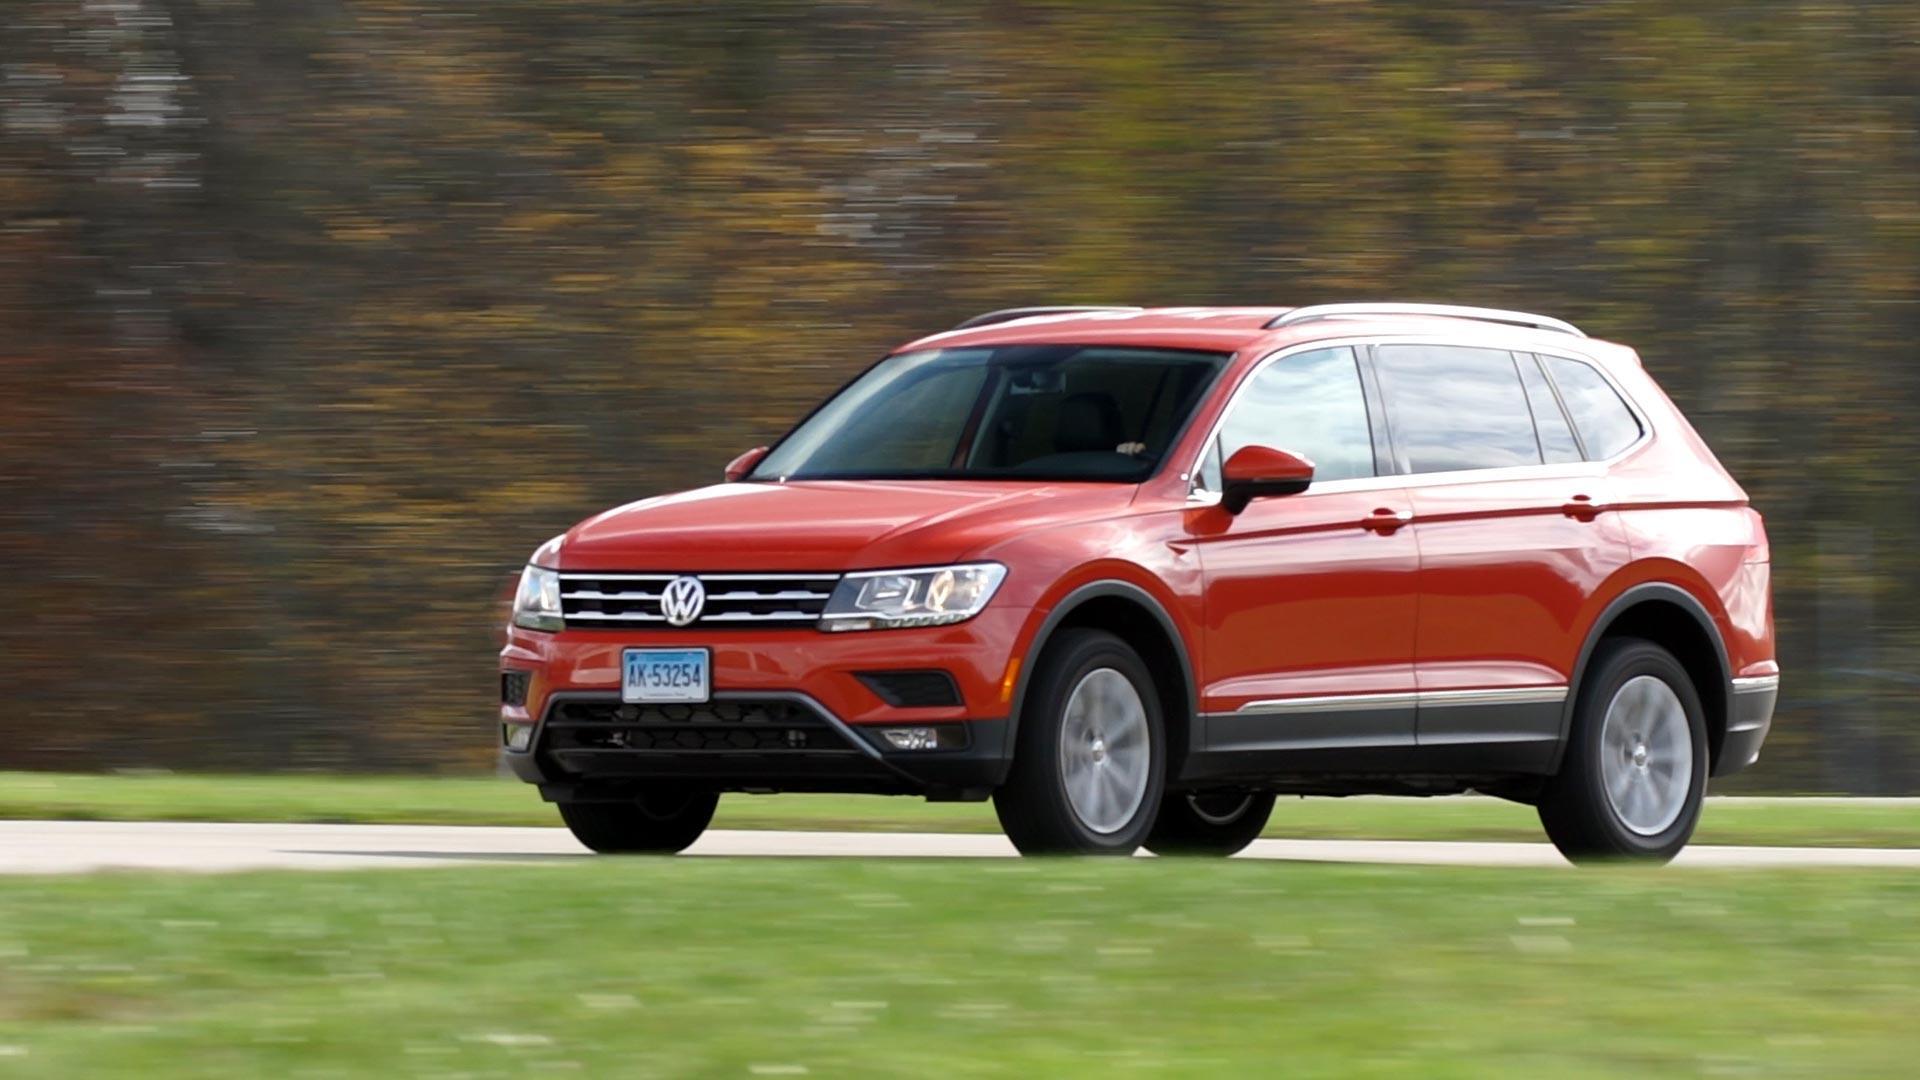 My Volkswagen Tiguan AllSpace: Ownership experience